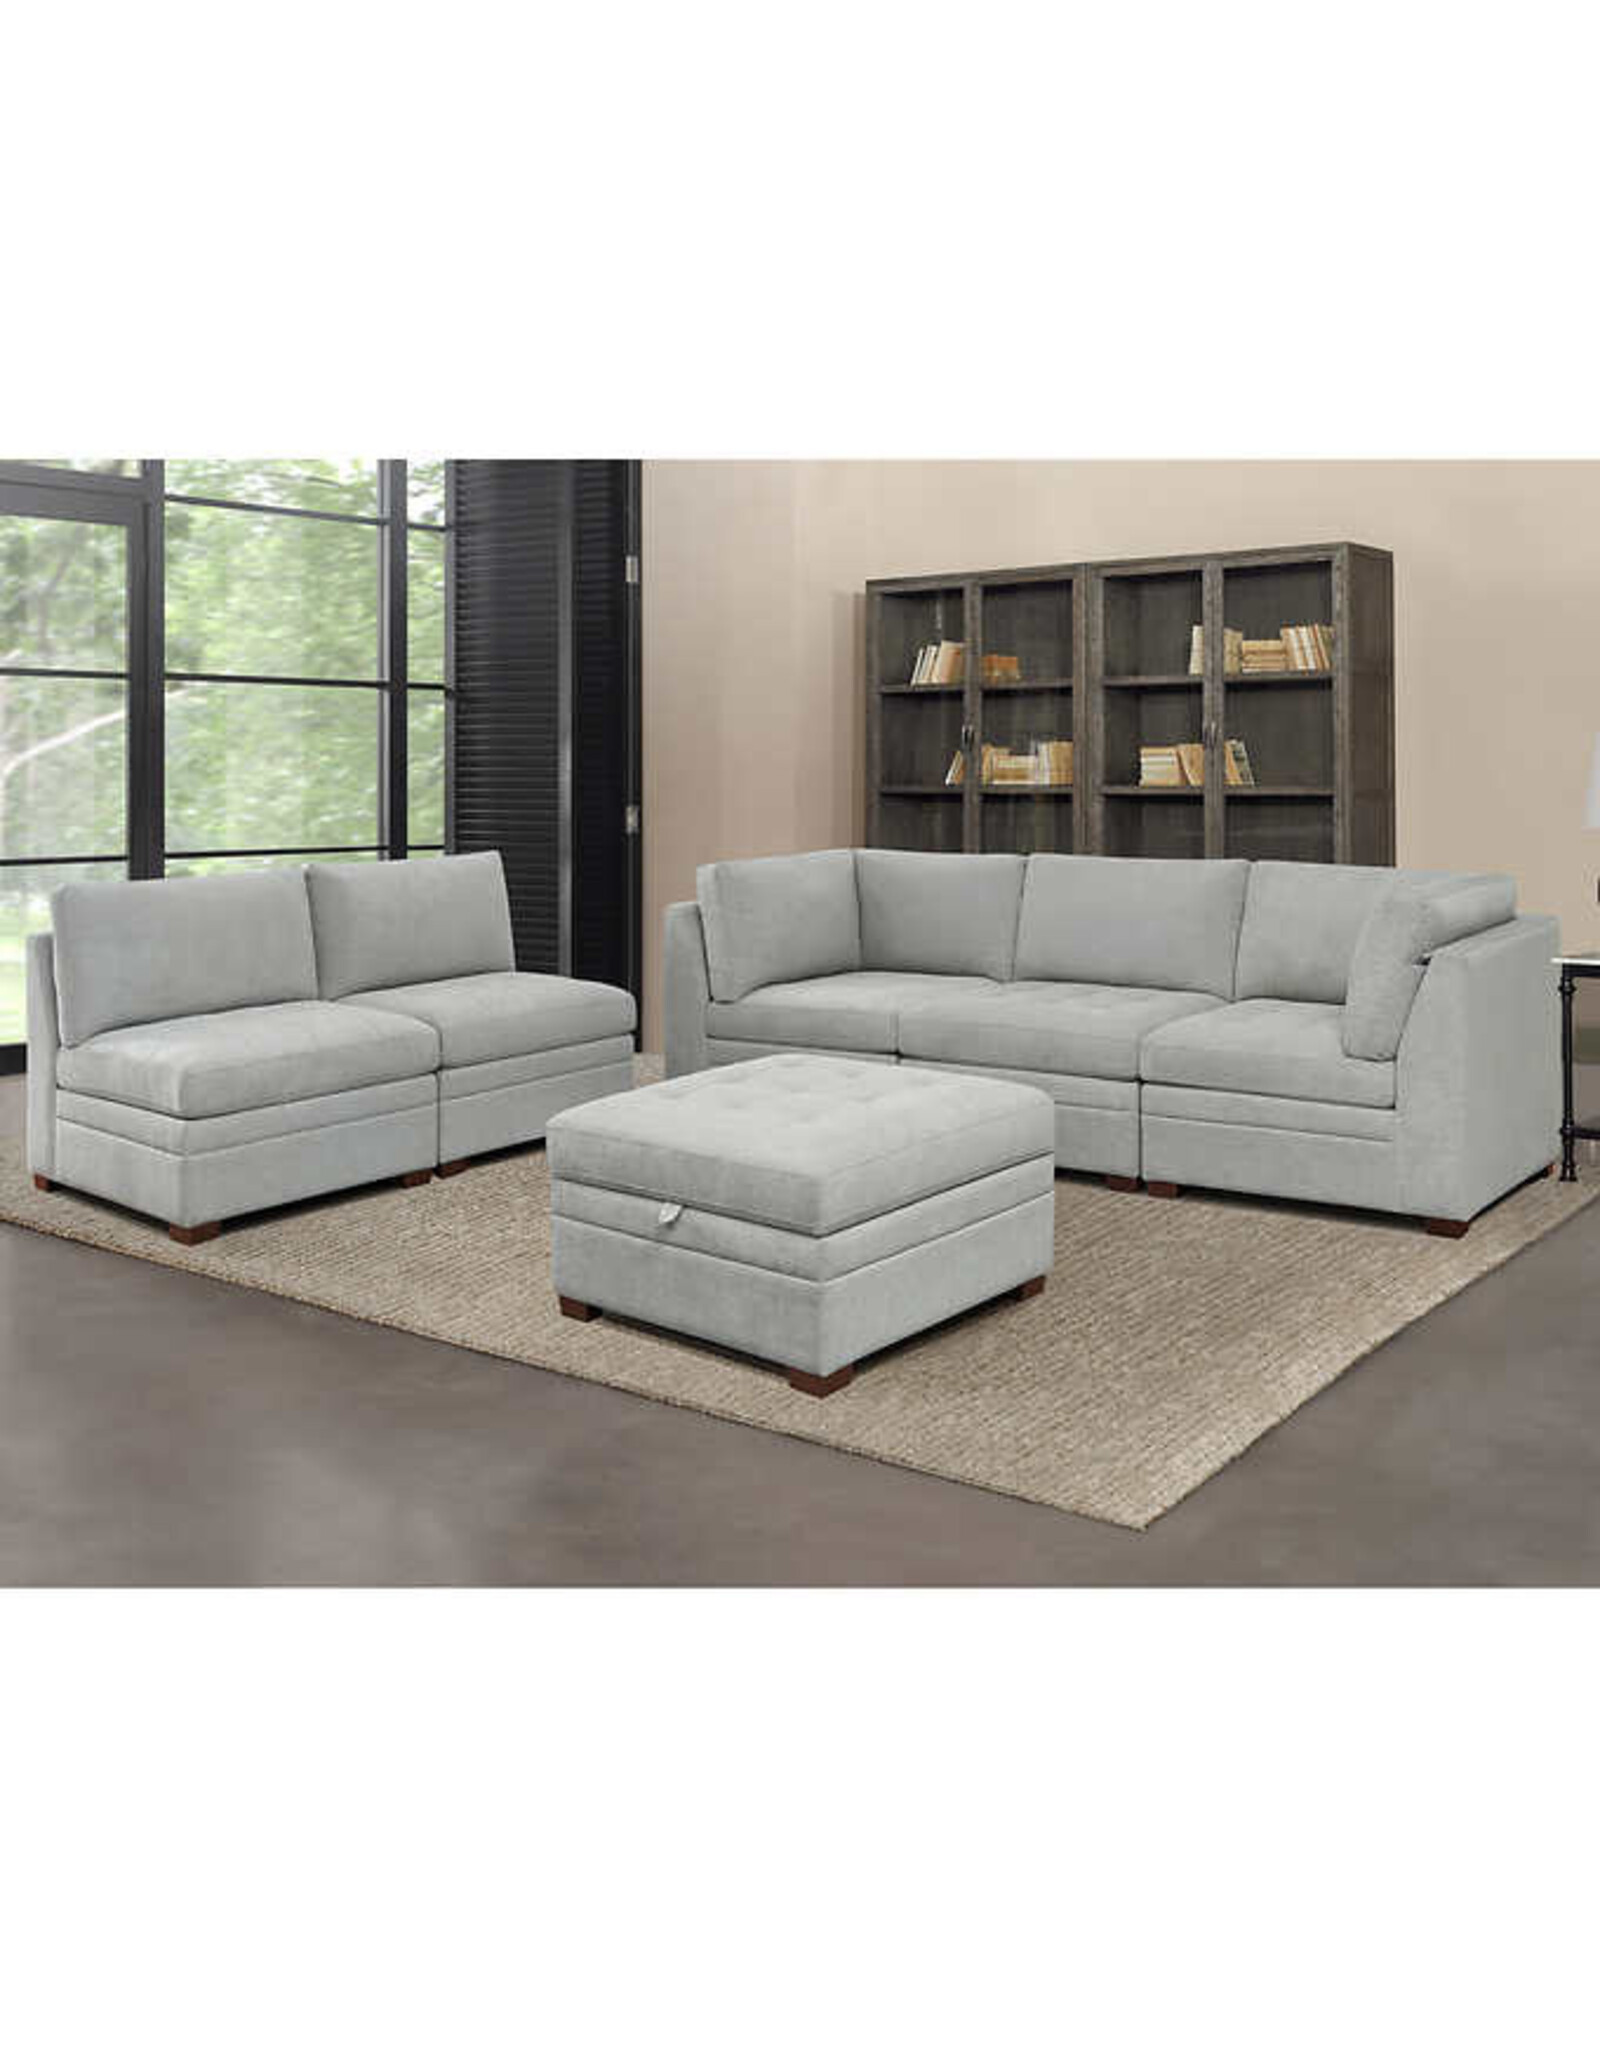 1644989 Thomasville Tisdale Modular Sectional with Storage Ottoman